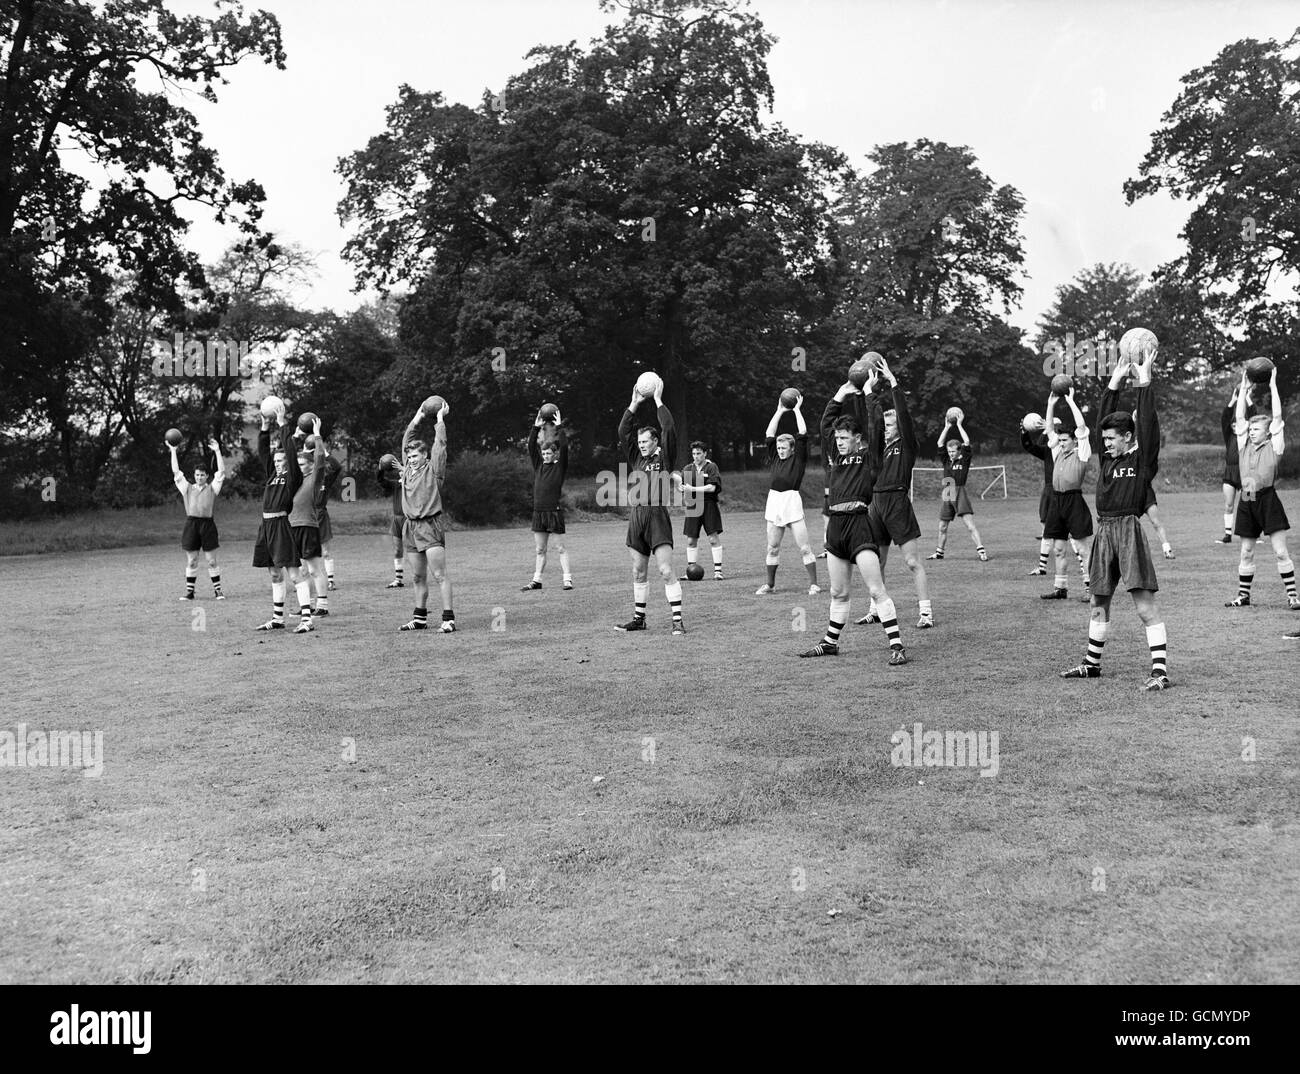 Football - 'Arsenal in Training' - London. Members of the Arsenal team seen in training before heading out on a pre-season tour of the continent, in Southgate, London. Stock Photo